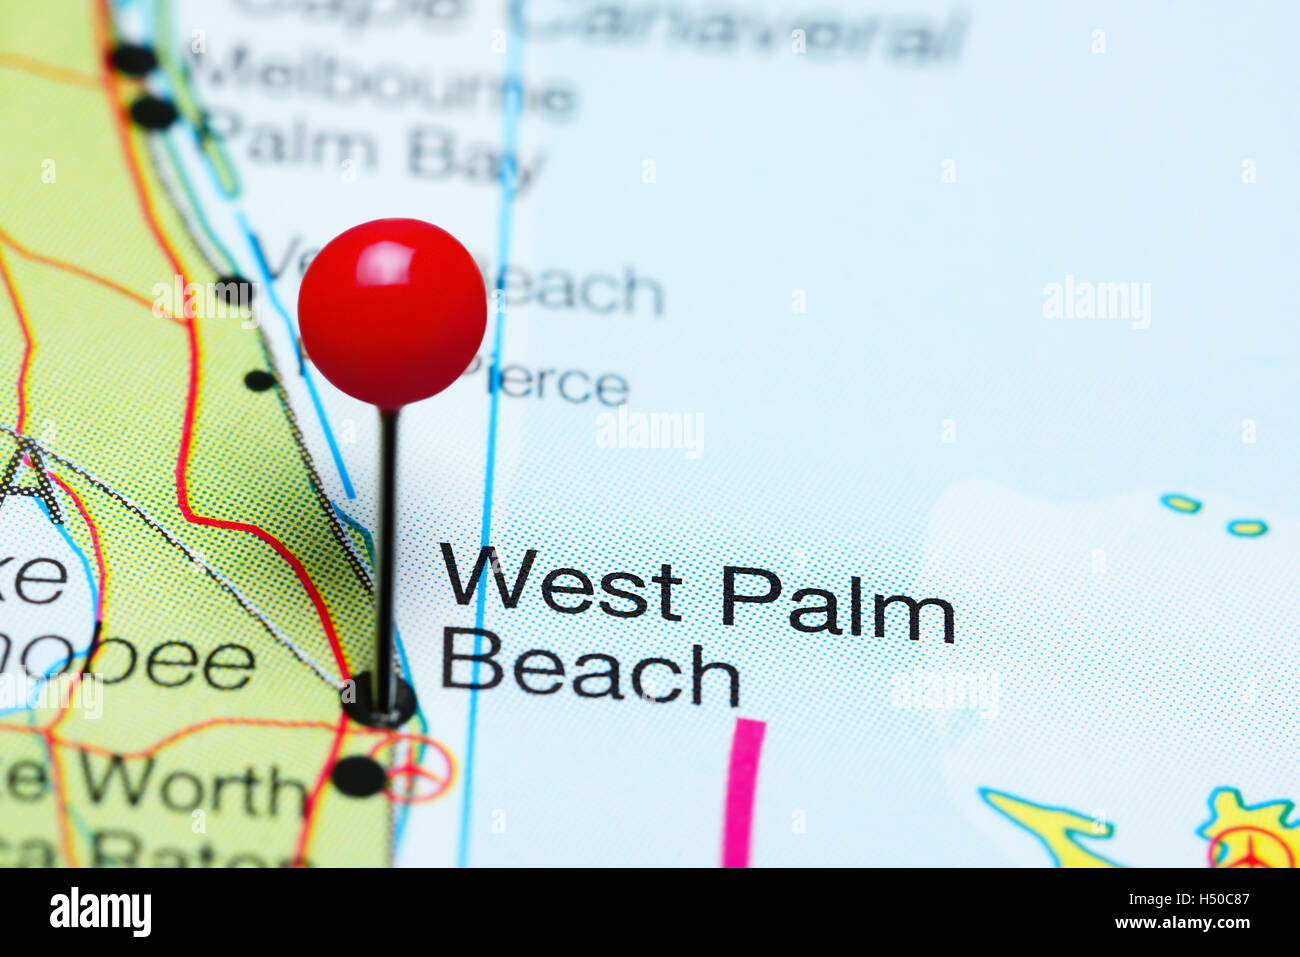 West Palm Beach pinned on a map of Florida, USA Stock Photo